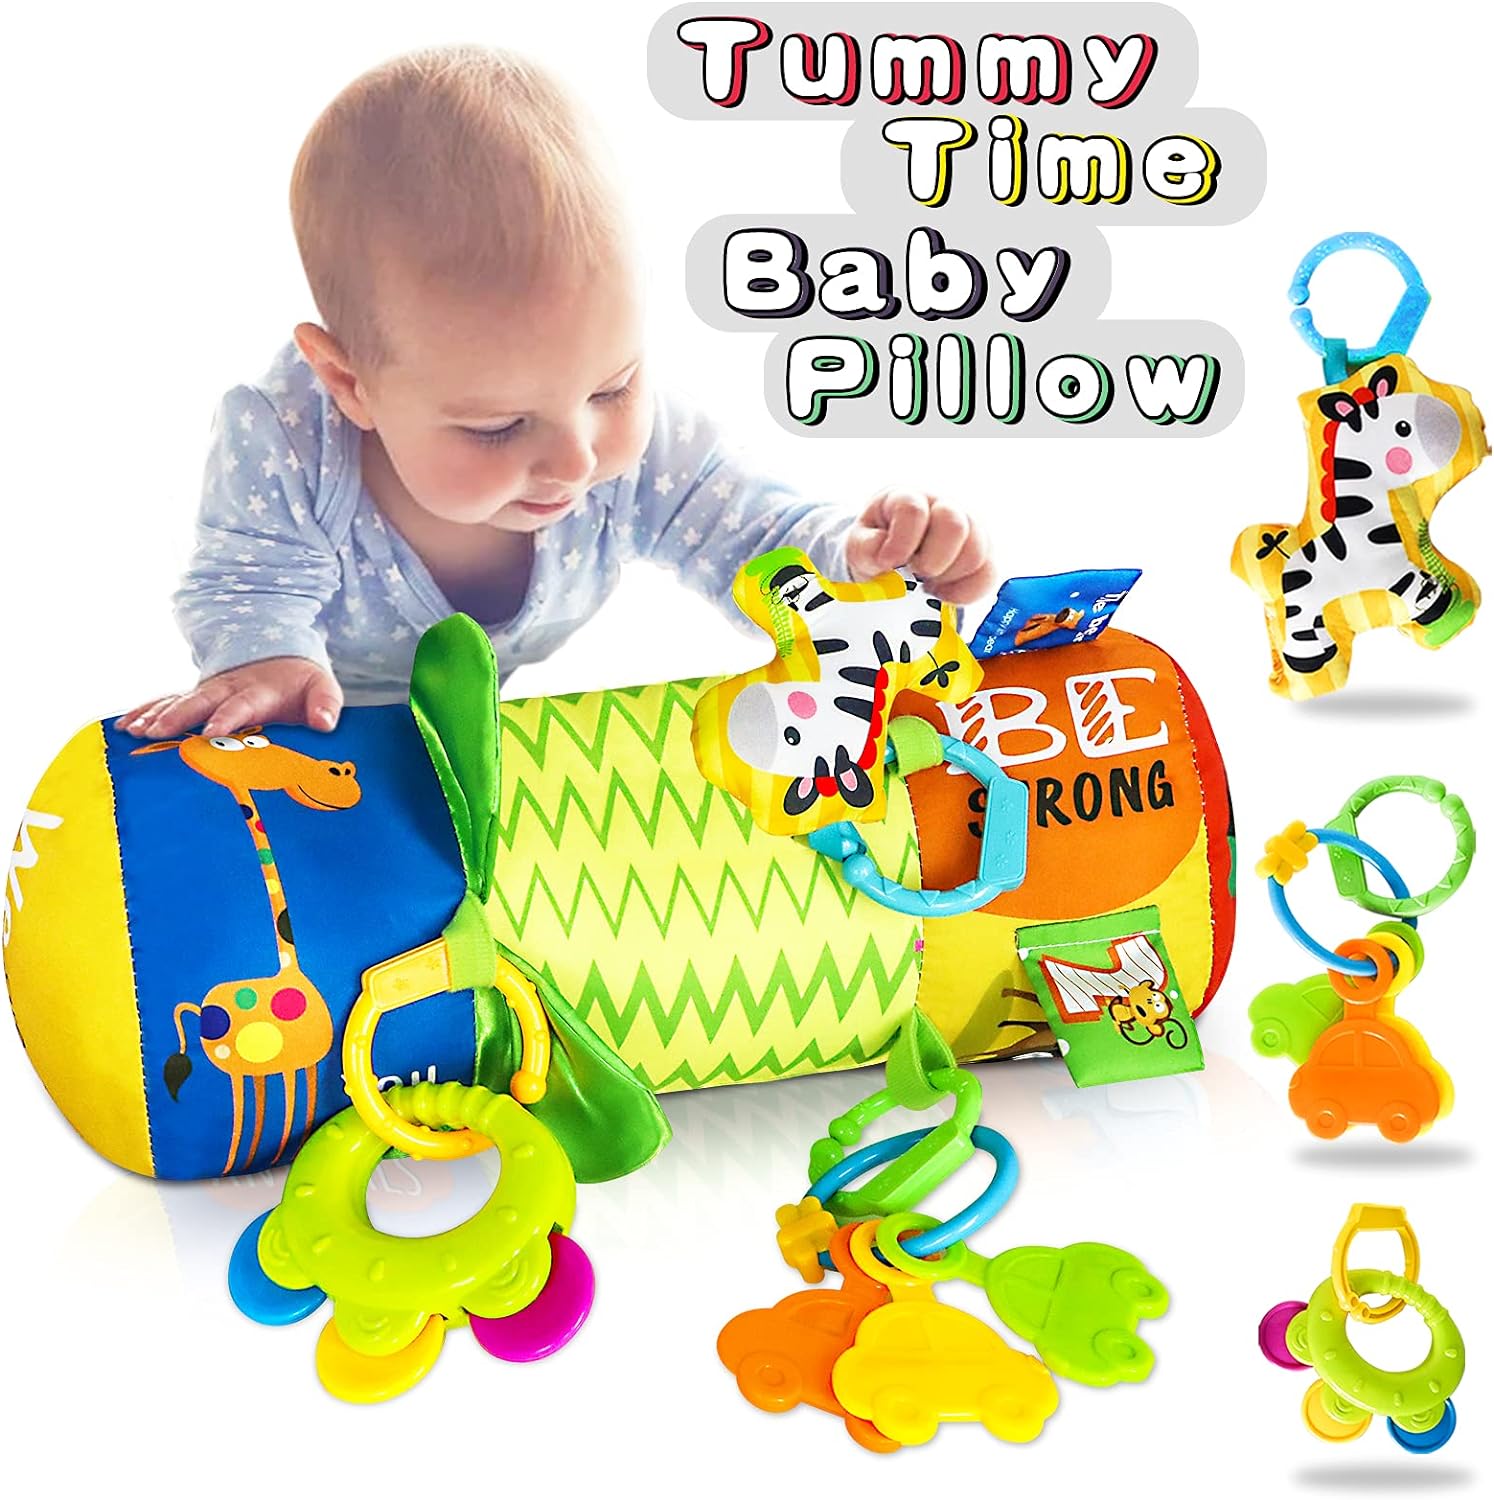 Pillow toy with toys